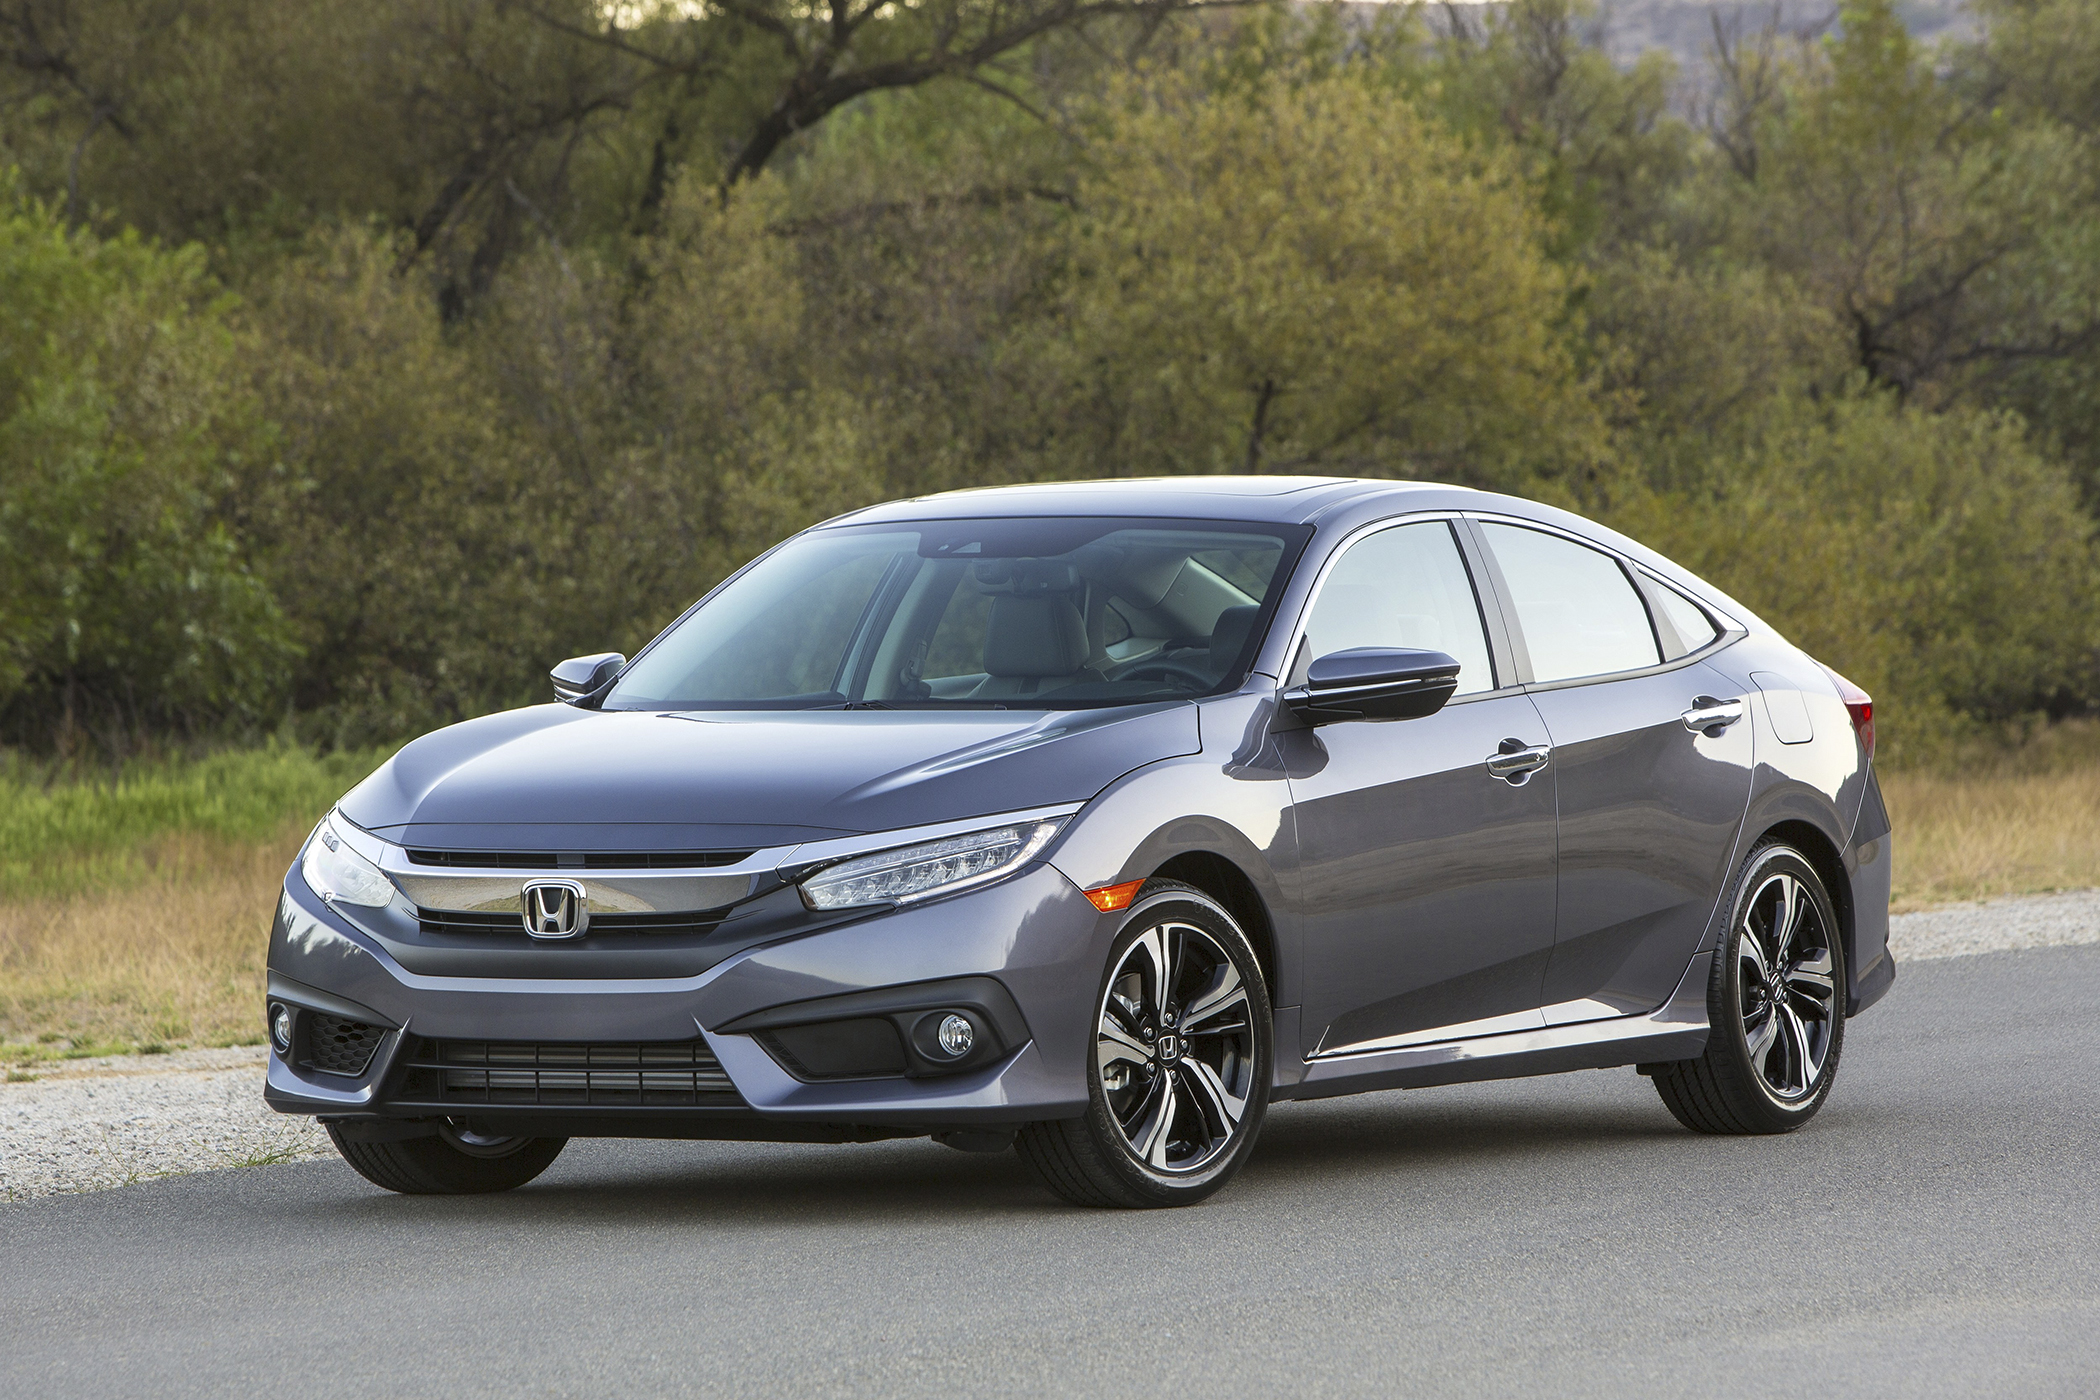 <strong>Best Sedan:</strong> The <a href="http://www.edmunds.com/honda/civic/2016/sedan/cost-to-own/" target="_blank">Honda Civic</a> has appeared on Edmunds.com's Best Retained Value list four times since 2011, making it the best non-luxury sedan in terms of resale value. Over five years, the Civic depreciates by an average of 35%, compared to 60% depreciation for the typical vehicle.